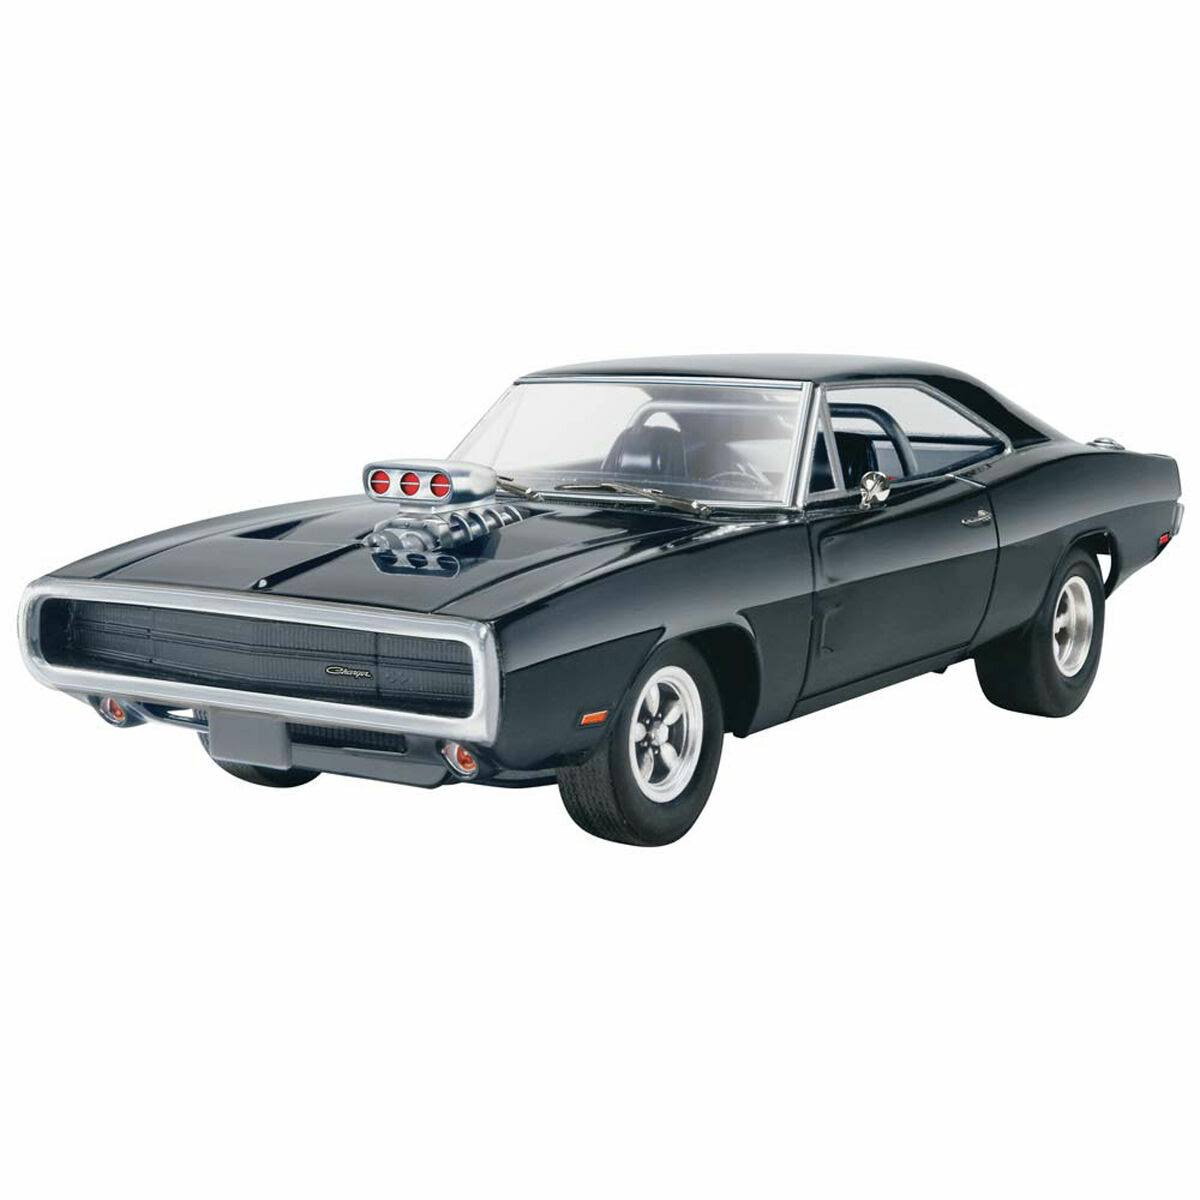 Revell Fast and Furious Dominics 1970 Dodge Charger Plastic Model Kit